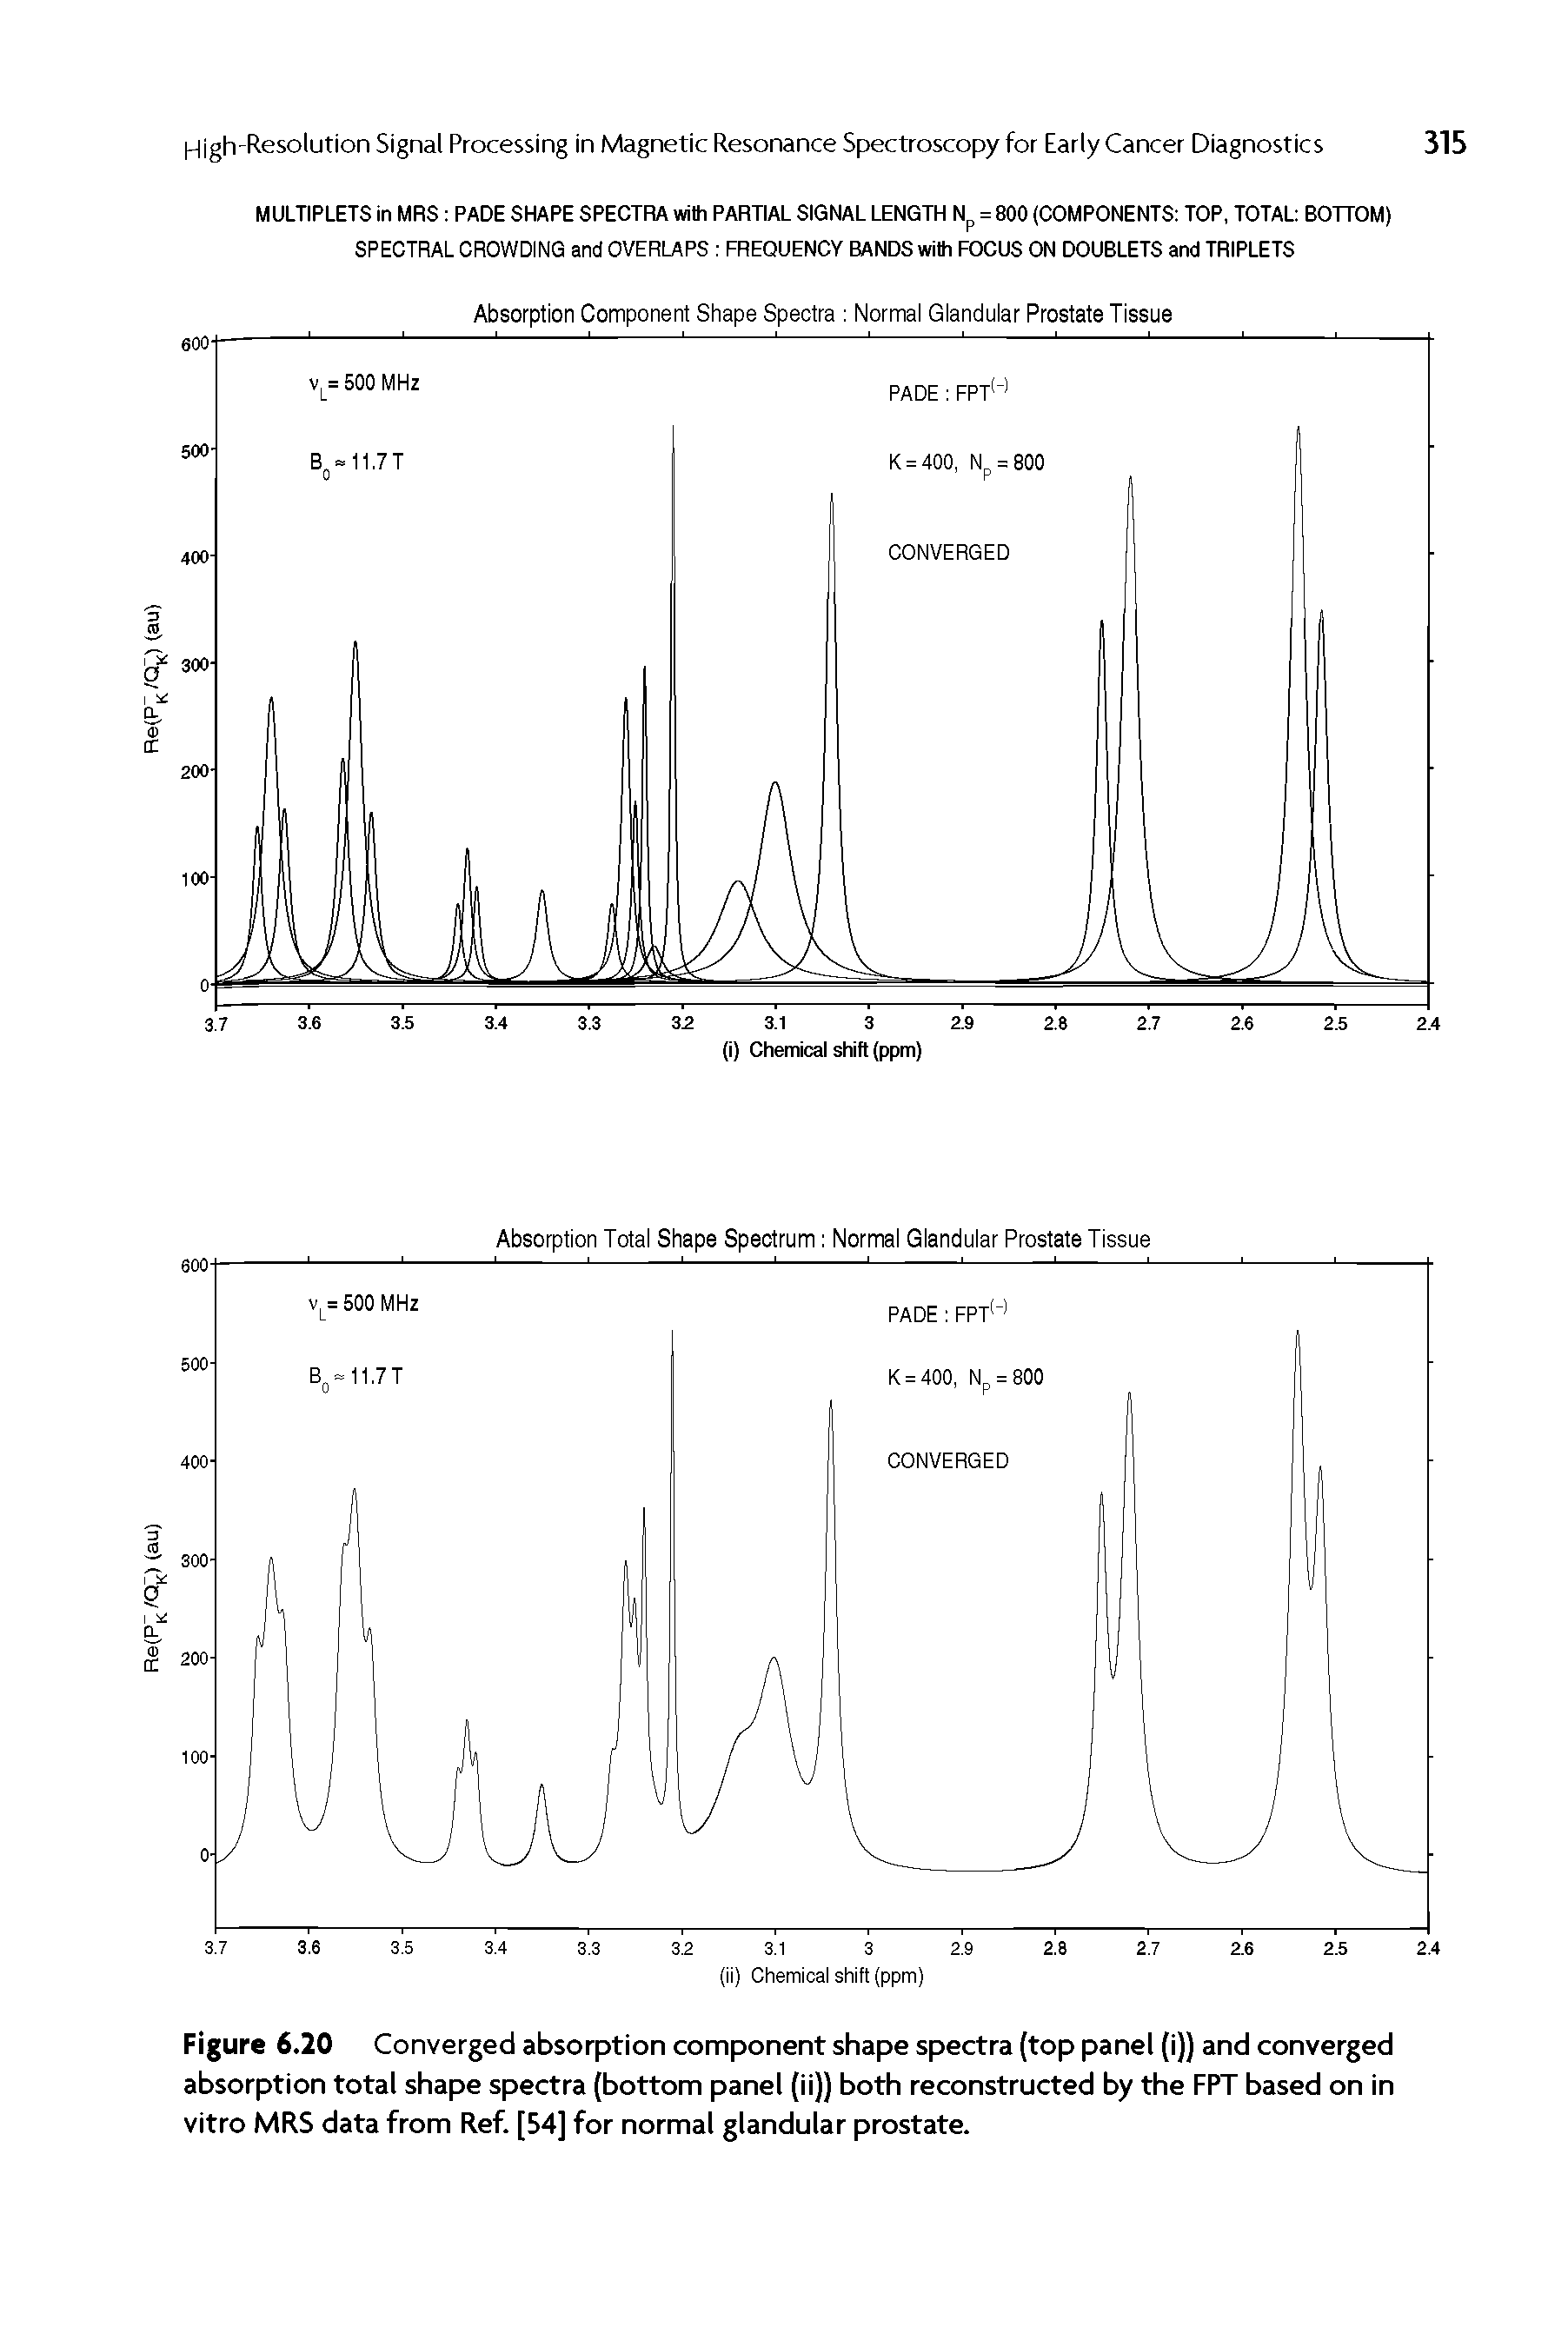 Figure 6.20 Converged absorption component shape spectra (top panel (i)) and converged absorption total shape spectra (bottom panel (ii)) both reconstructed by the FPT based on in vitro MRS data from Ref. [54] for normal glandular prostate.